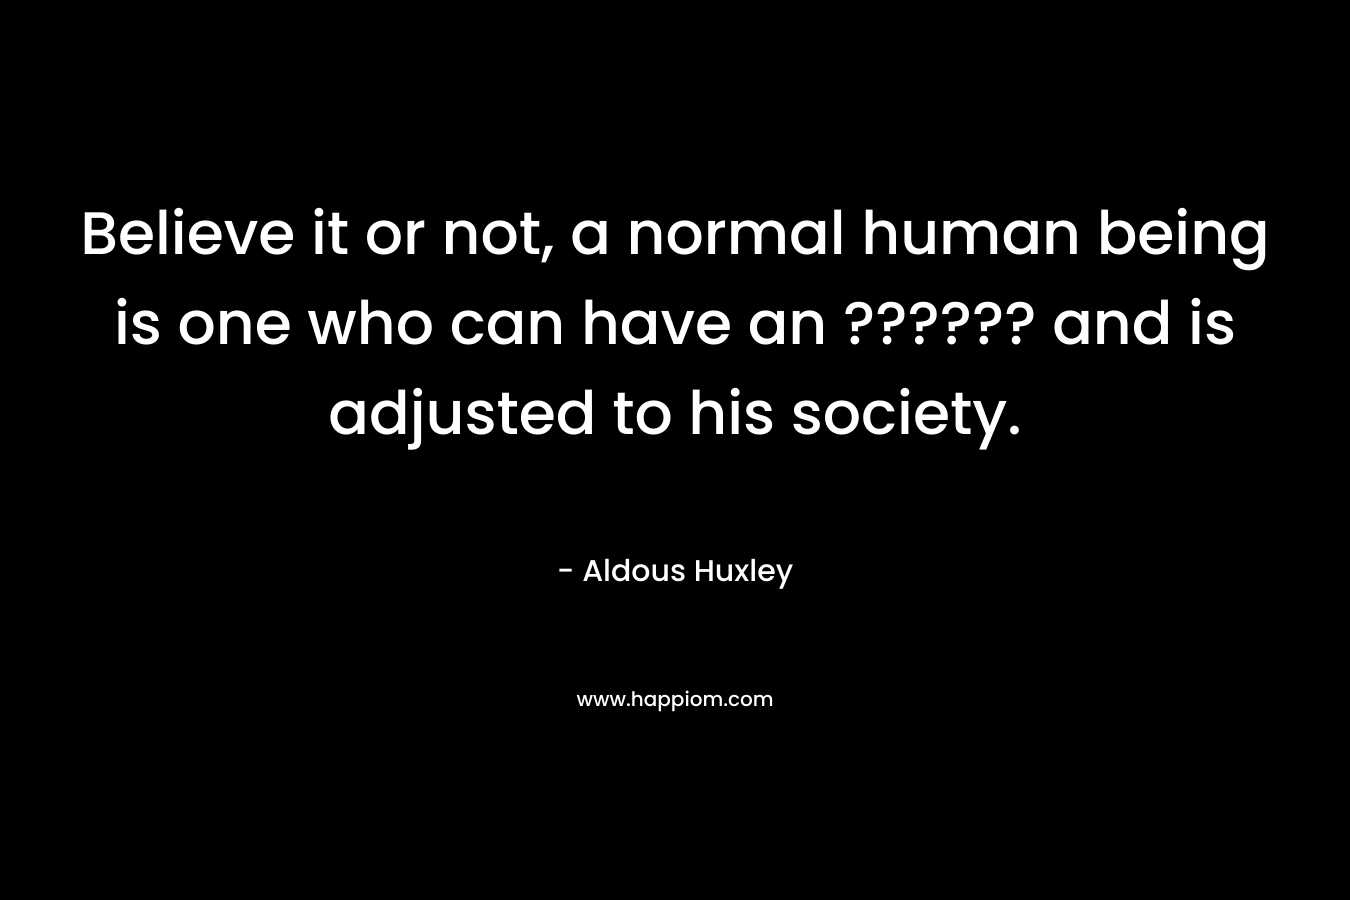 Believe it or not, a normal human being is one who can have an ?????? and is adjusted to his society.